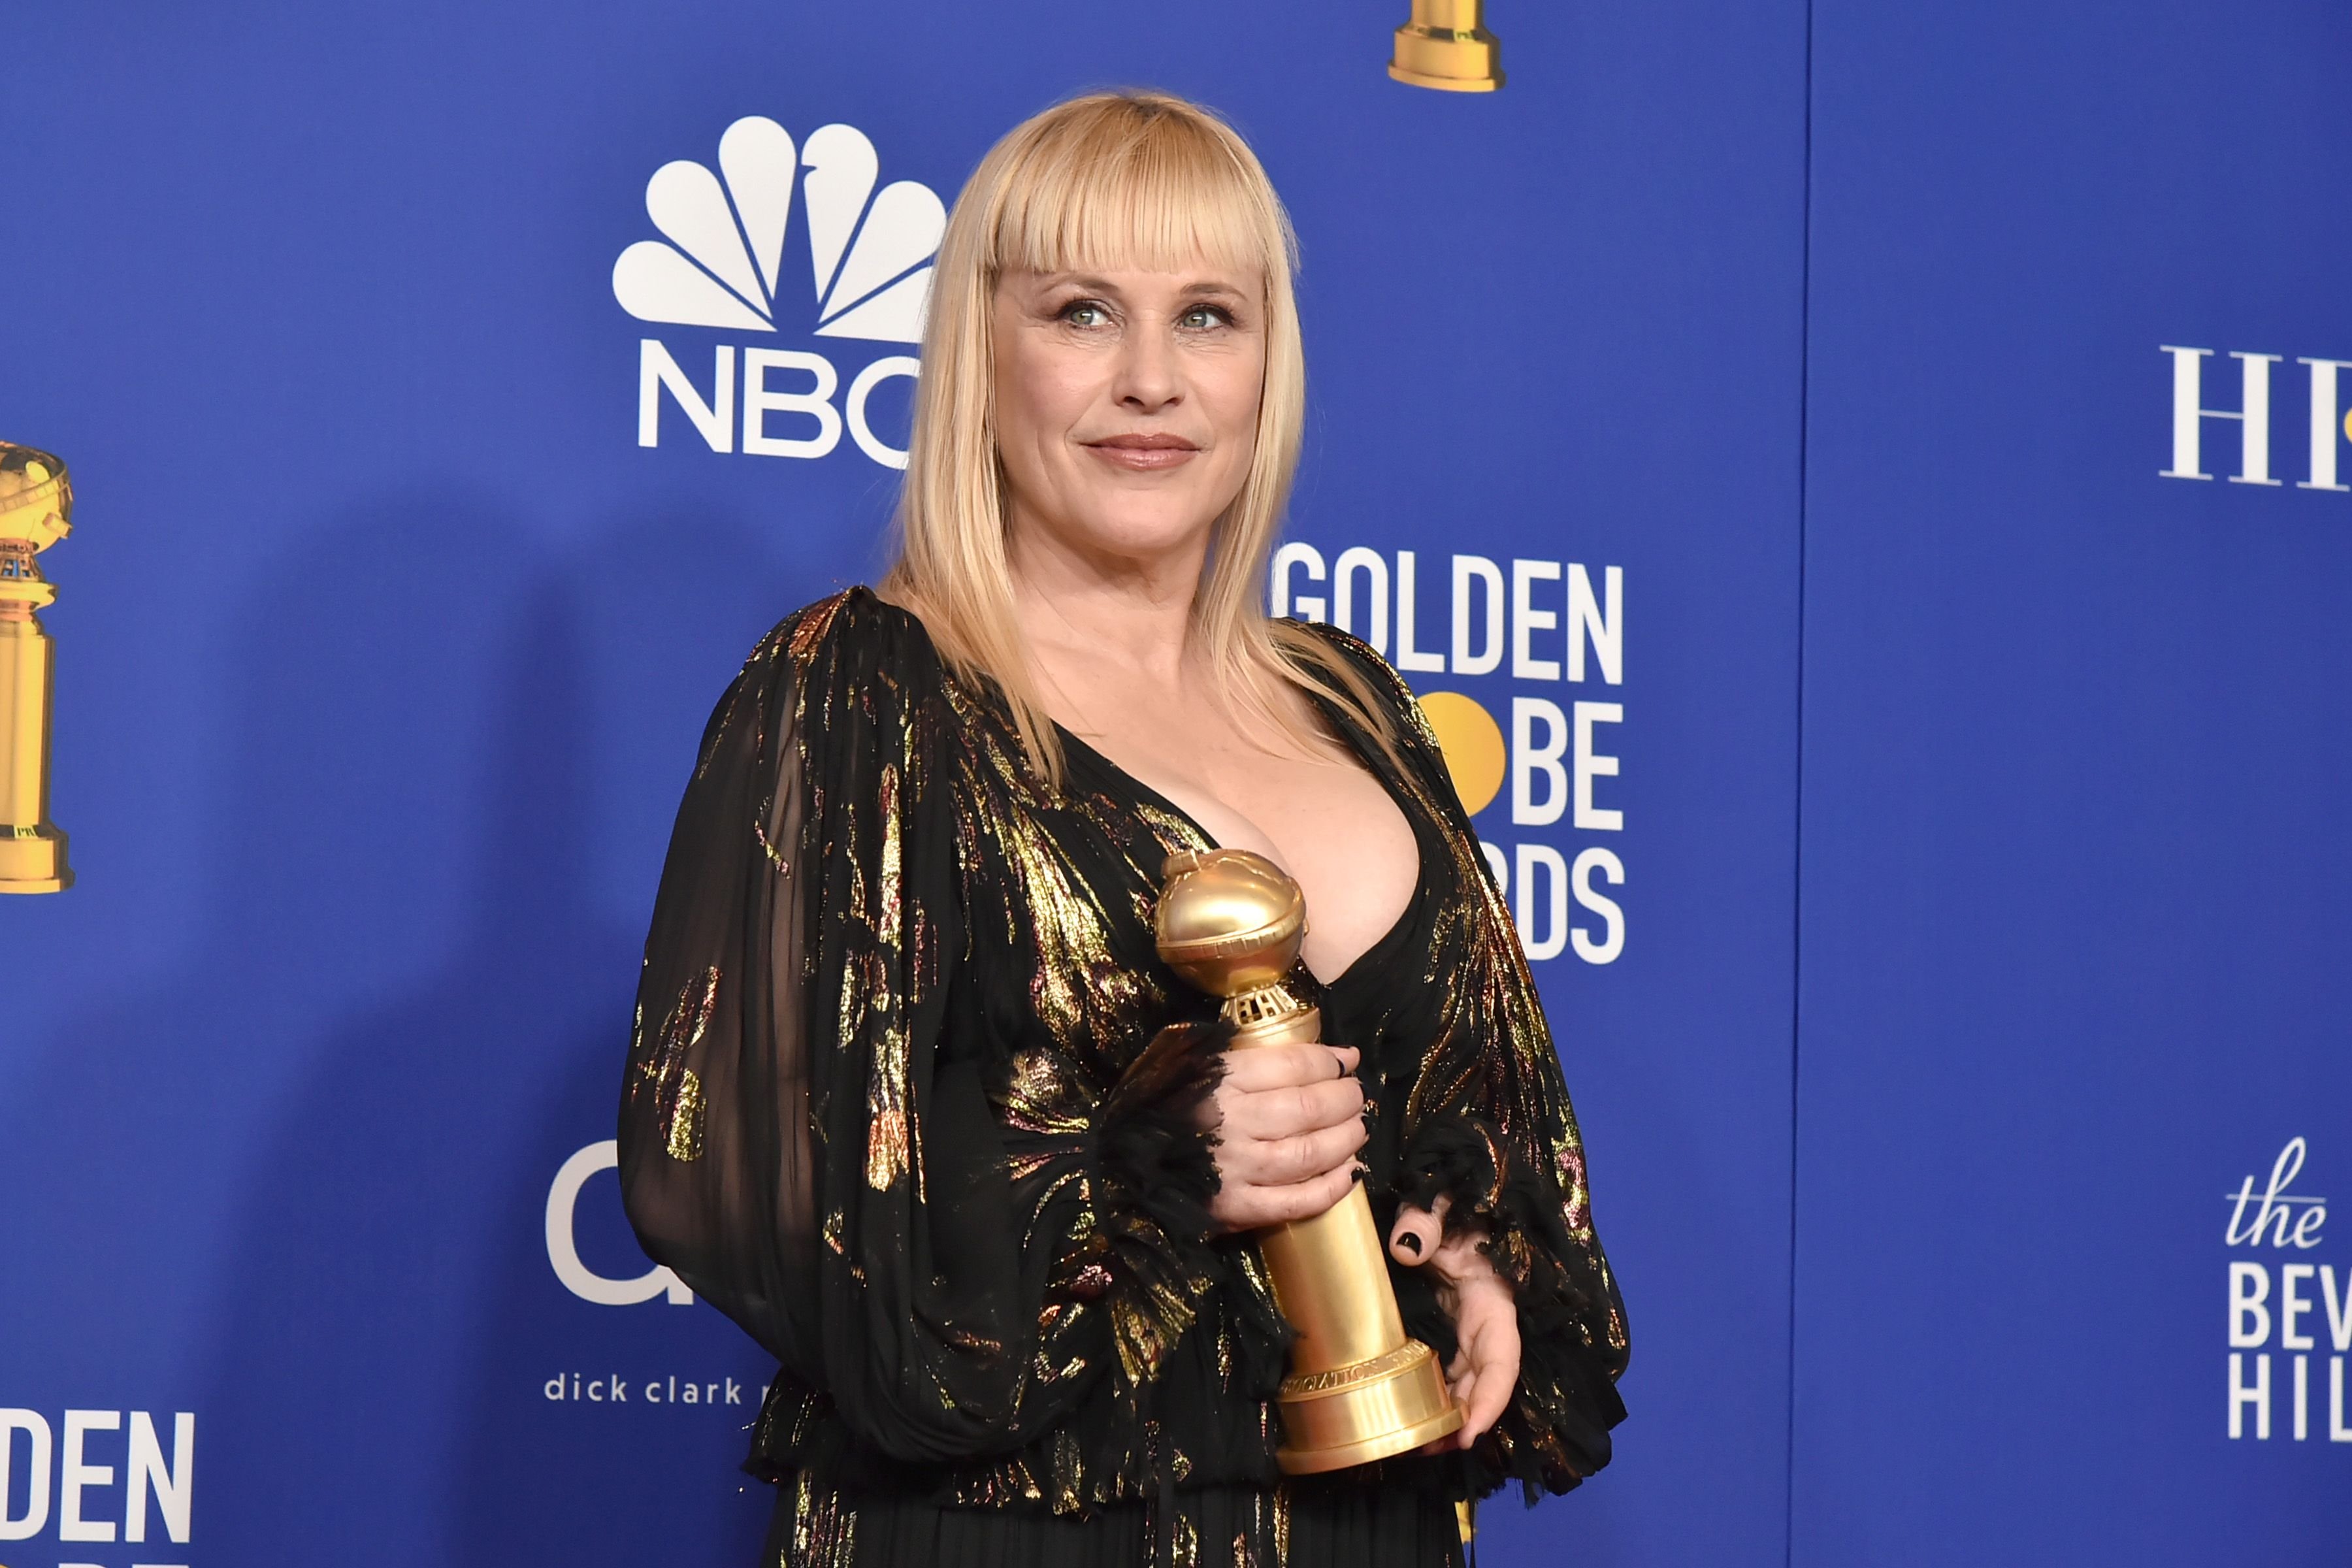 Patricia Arquette at the 77th Golden Globes Awards - Press Room on January 5, 2020, in Beverly Hills, California. | Source: David Crotty/Patrick McMullan/Getty Images